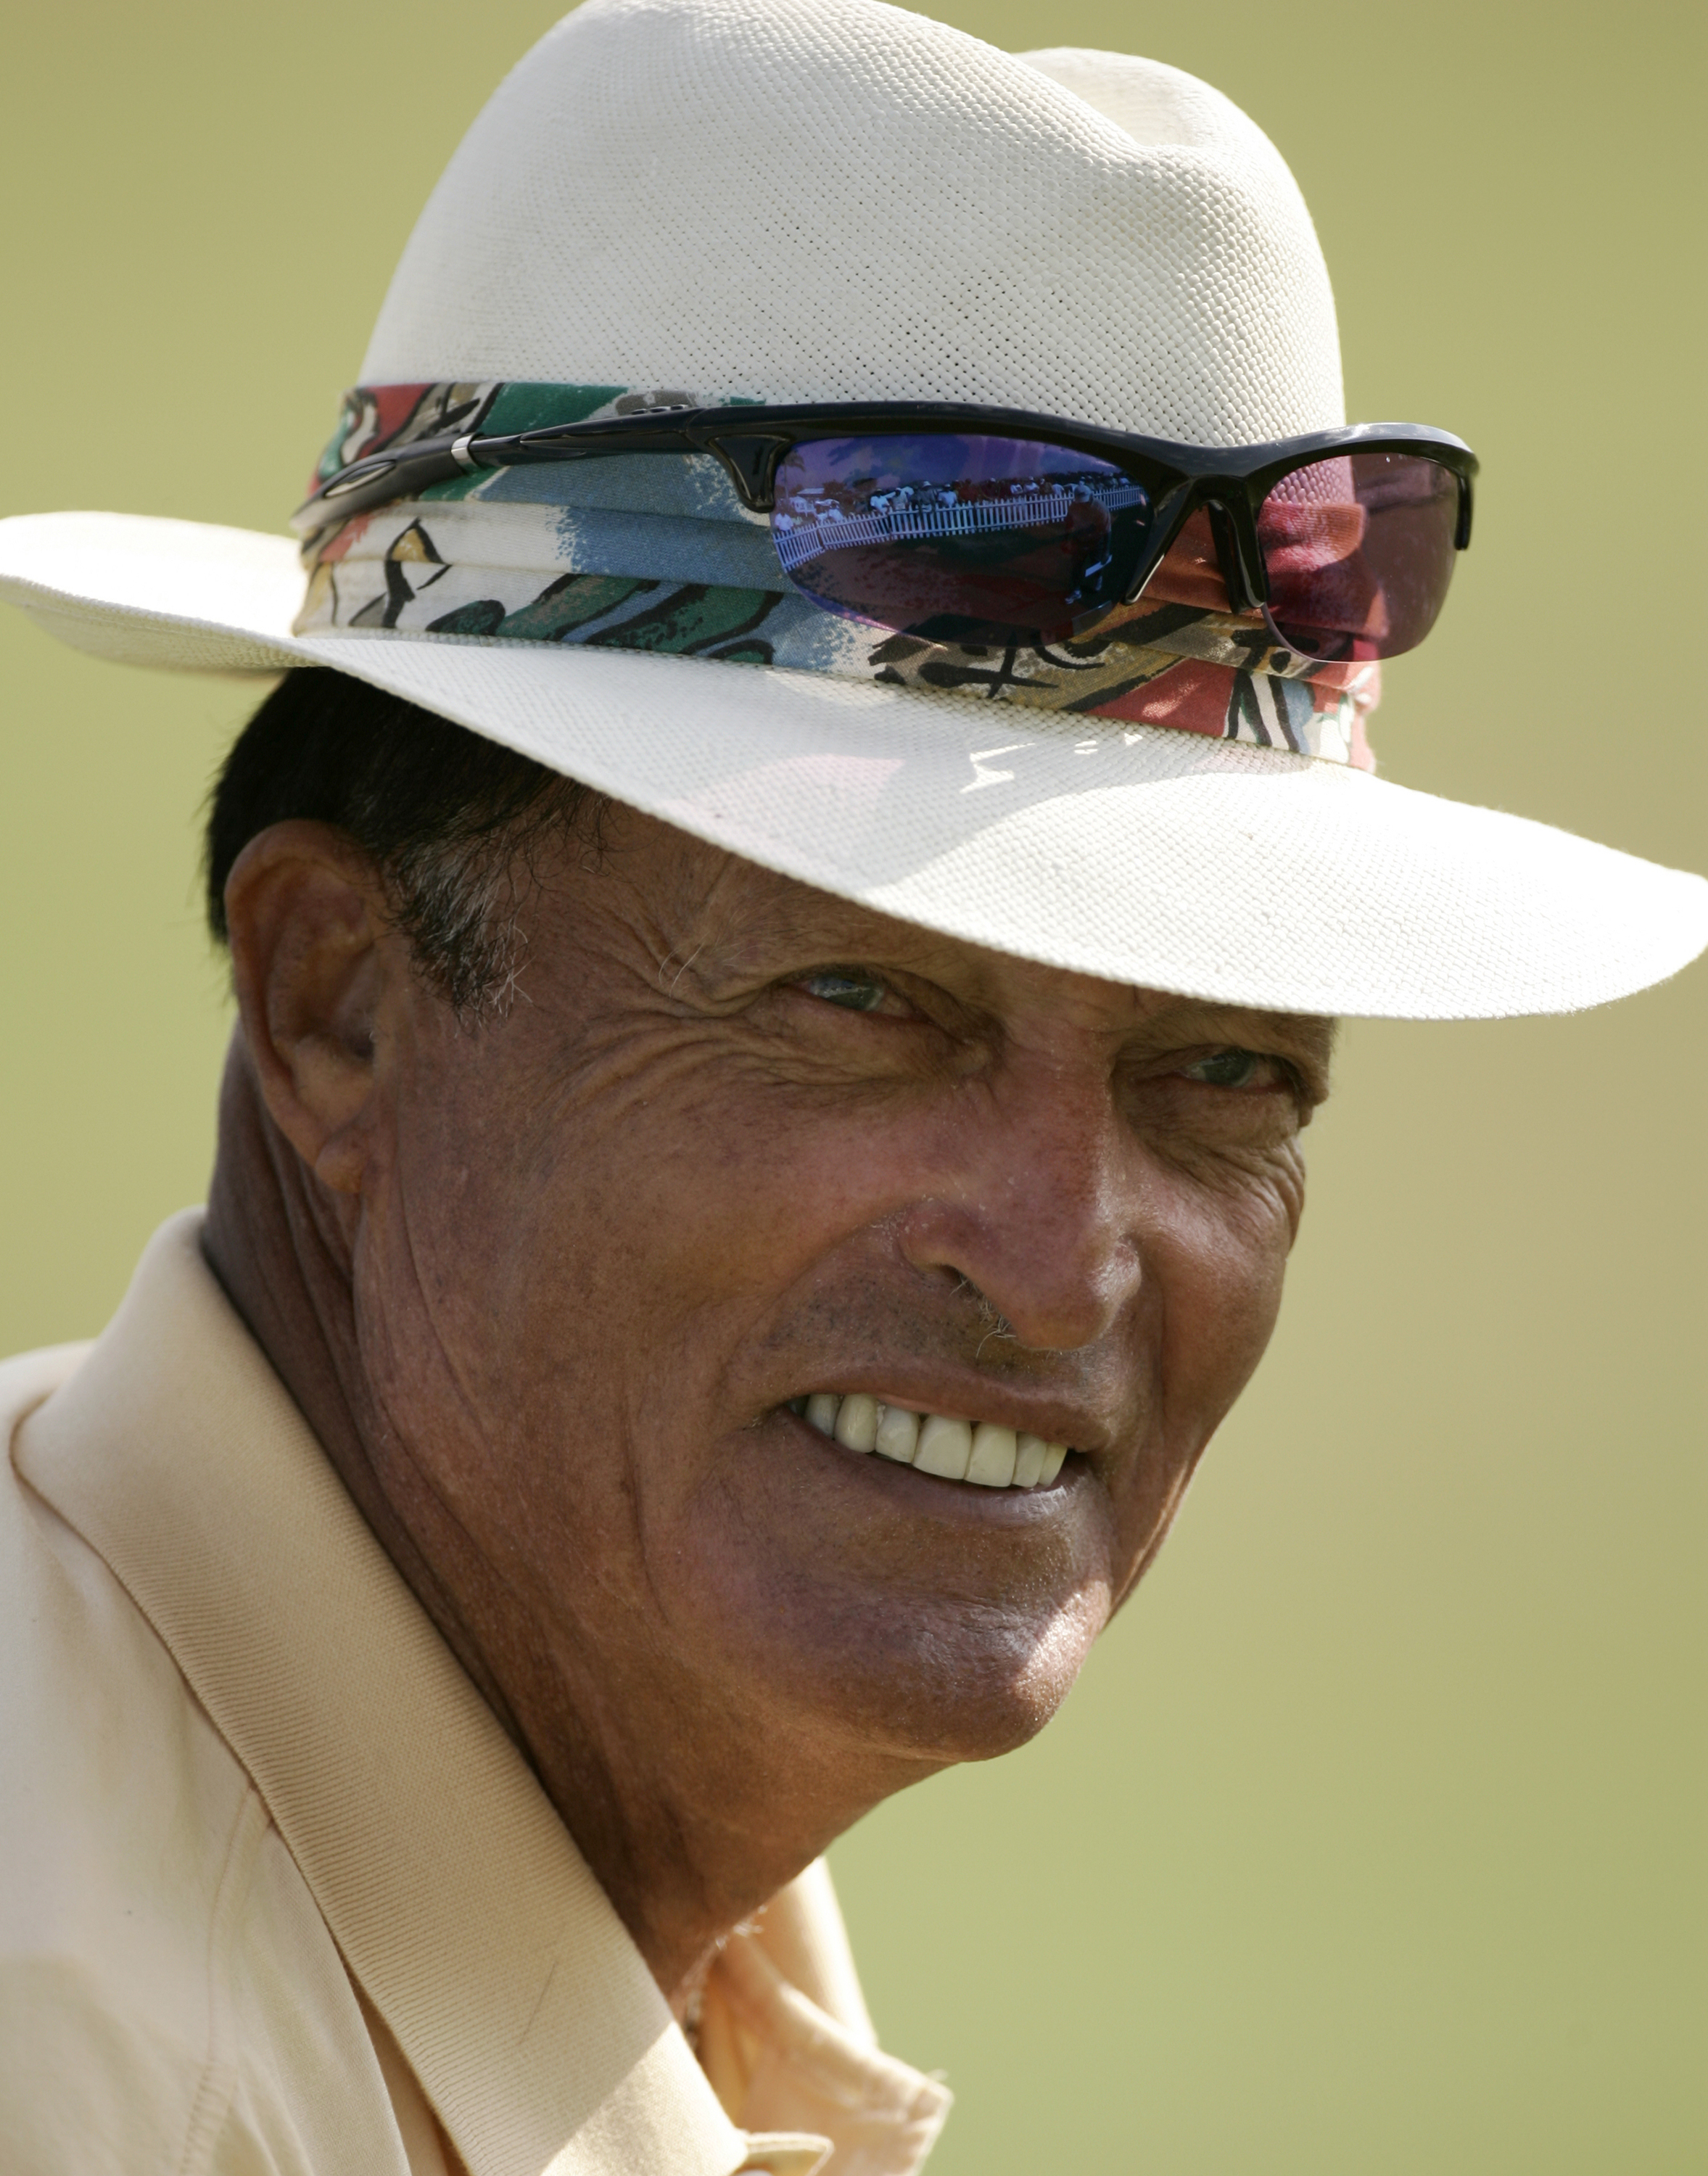 UNITED STATES - FEBRUARY 11:  Chi Chi Rodriguez during the final round of the Allianz Championship held at The Old Course at Broken Sound Club in Boca Raton, Florida on February 11, 2007.  (Photo by Sam Greenwood/Getty Images)